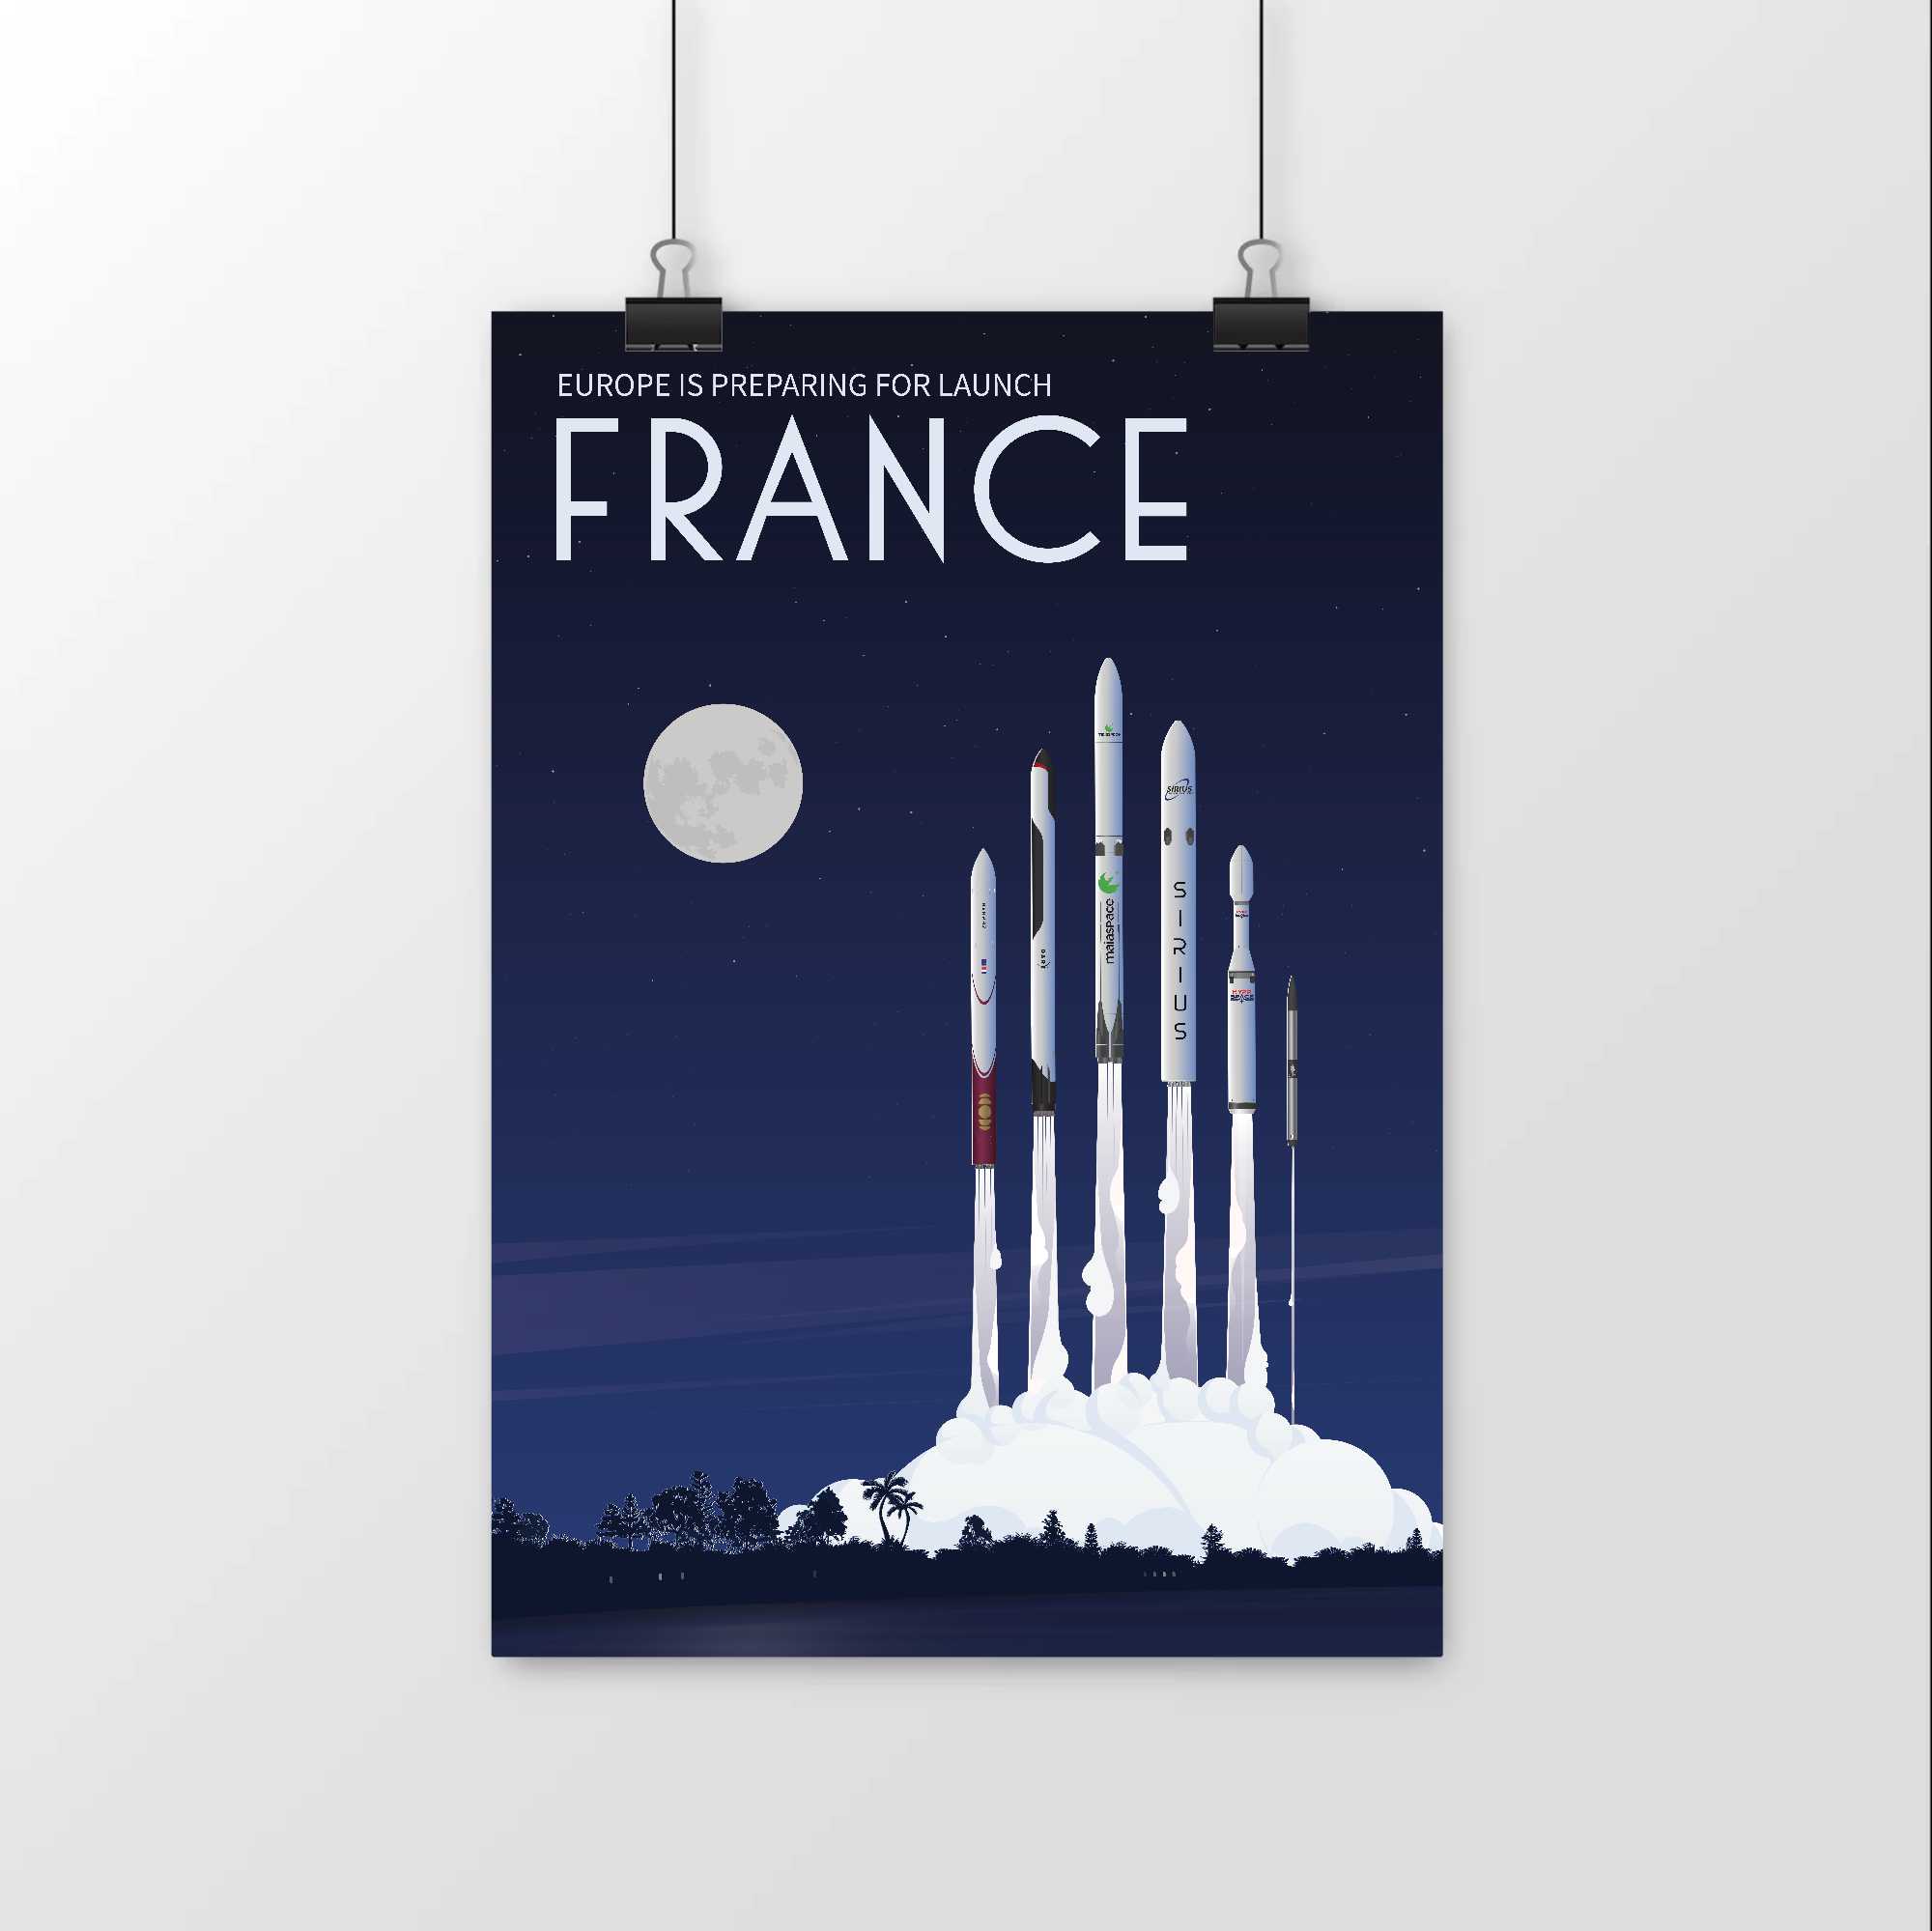 European Spaceflight Europe is preparing for launch posters: France Launch Poster.